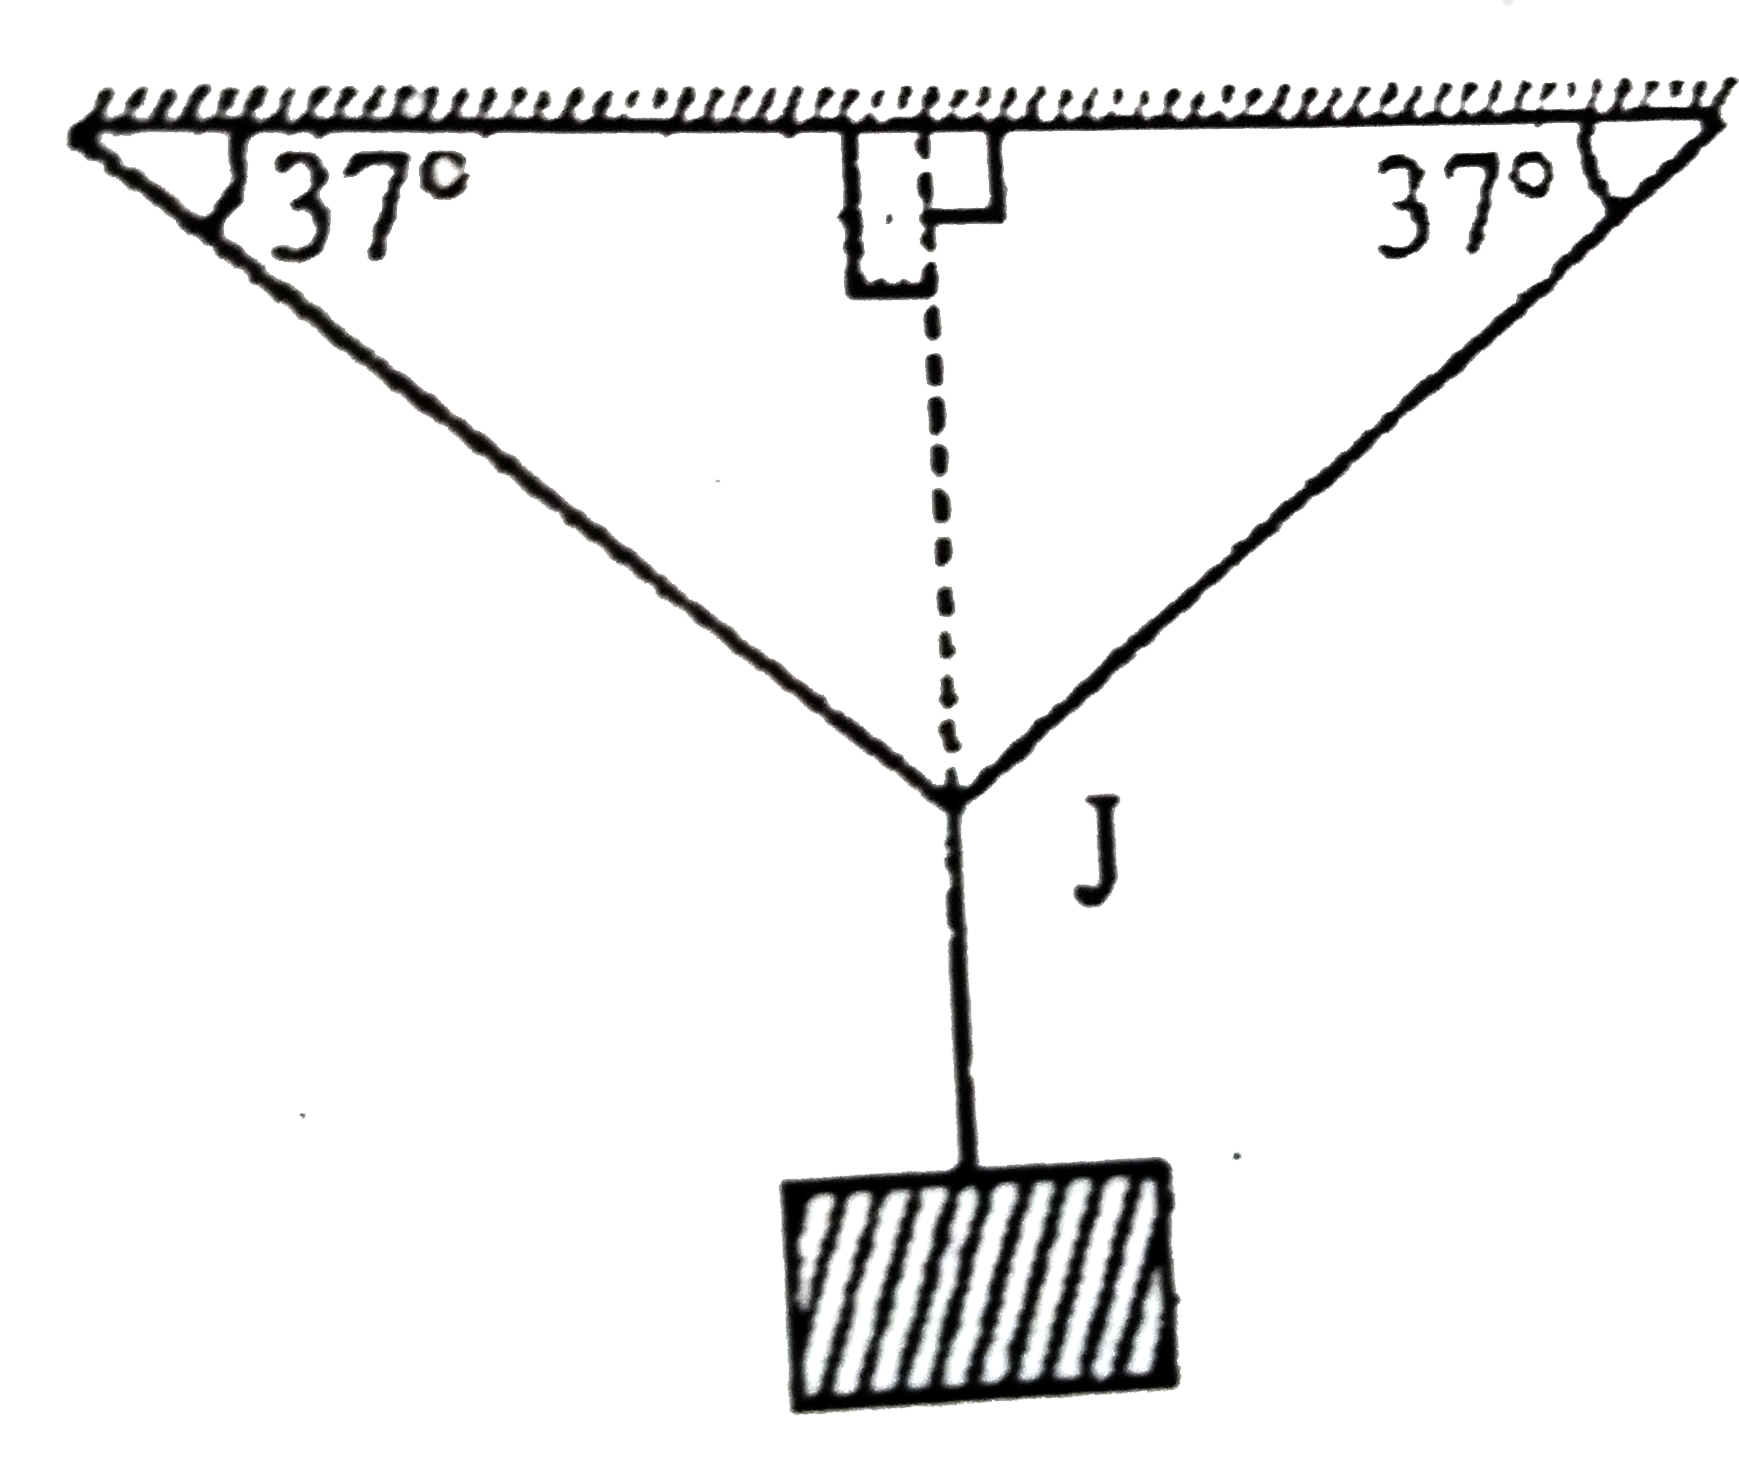 A block is hanged by means of two identical wires having cross section area 1mm^(2) as shown in the diagram. If temperature is lowered by 10^(@)C, find the mass (in kg) to be added to the hanging mass such that the junction (J) remains at initial position, Given that coefficient of linear expansion alpha=2xx10^(-5)//.^(@)C, Young's modolus Y=5xx10^(11) N//m^(2) for the wire.